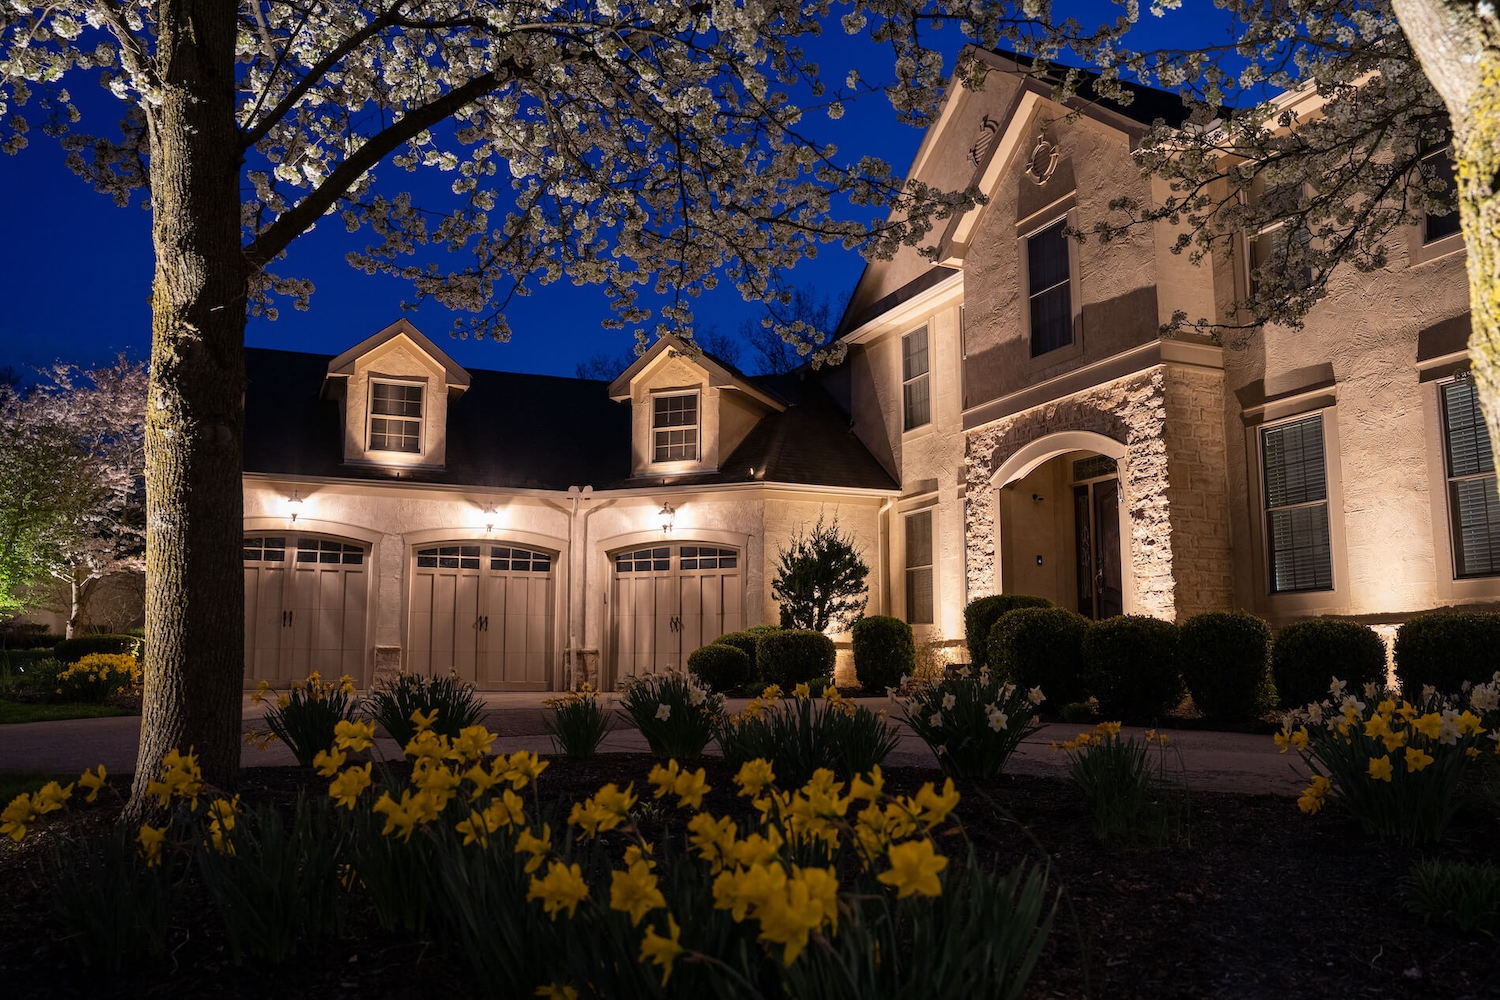 Landscape Lighting Design by Midwest Lightscapes will enhance your homes value